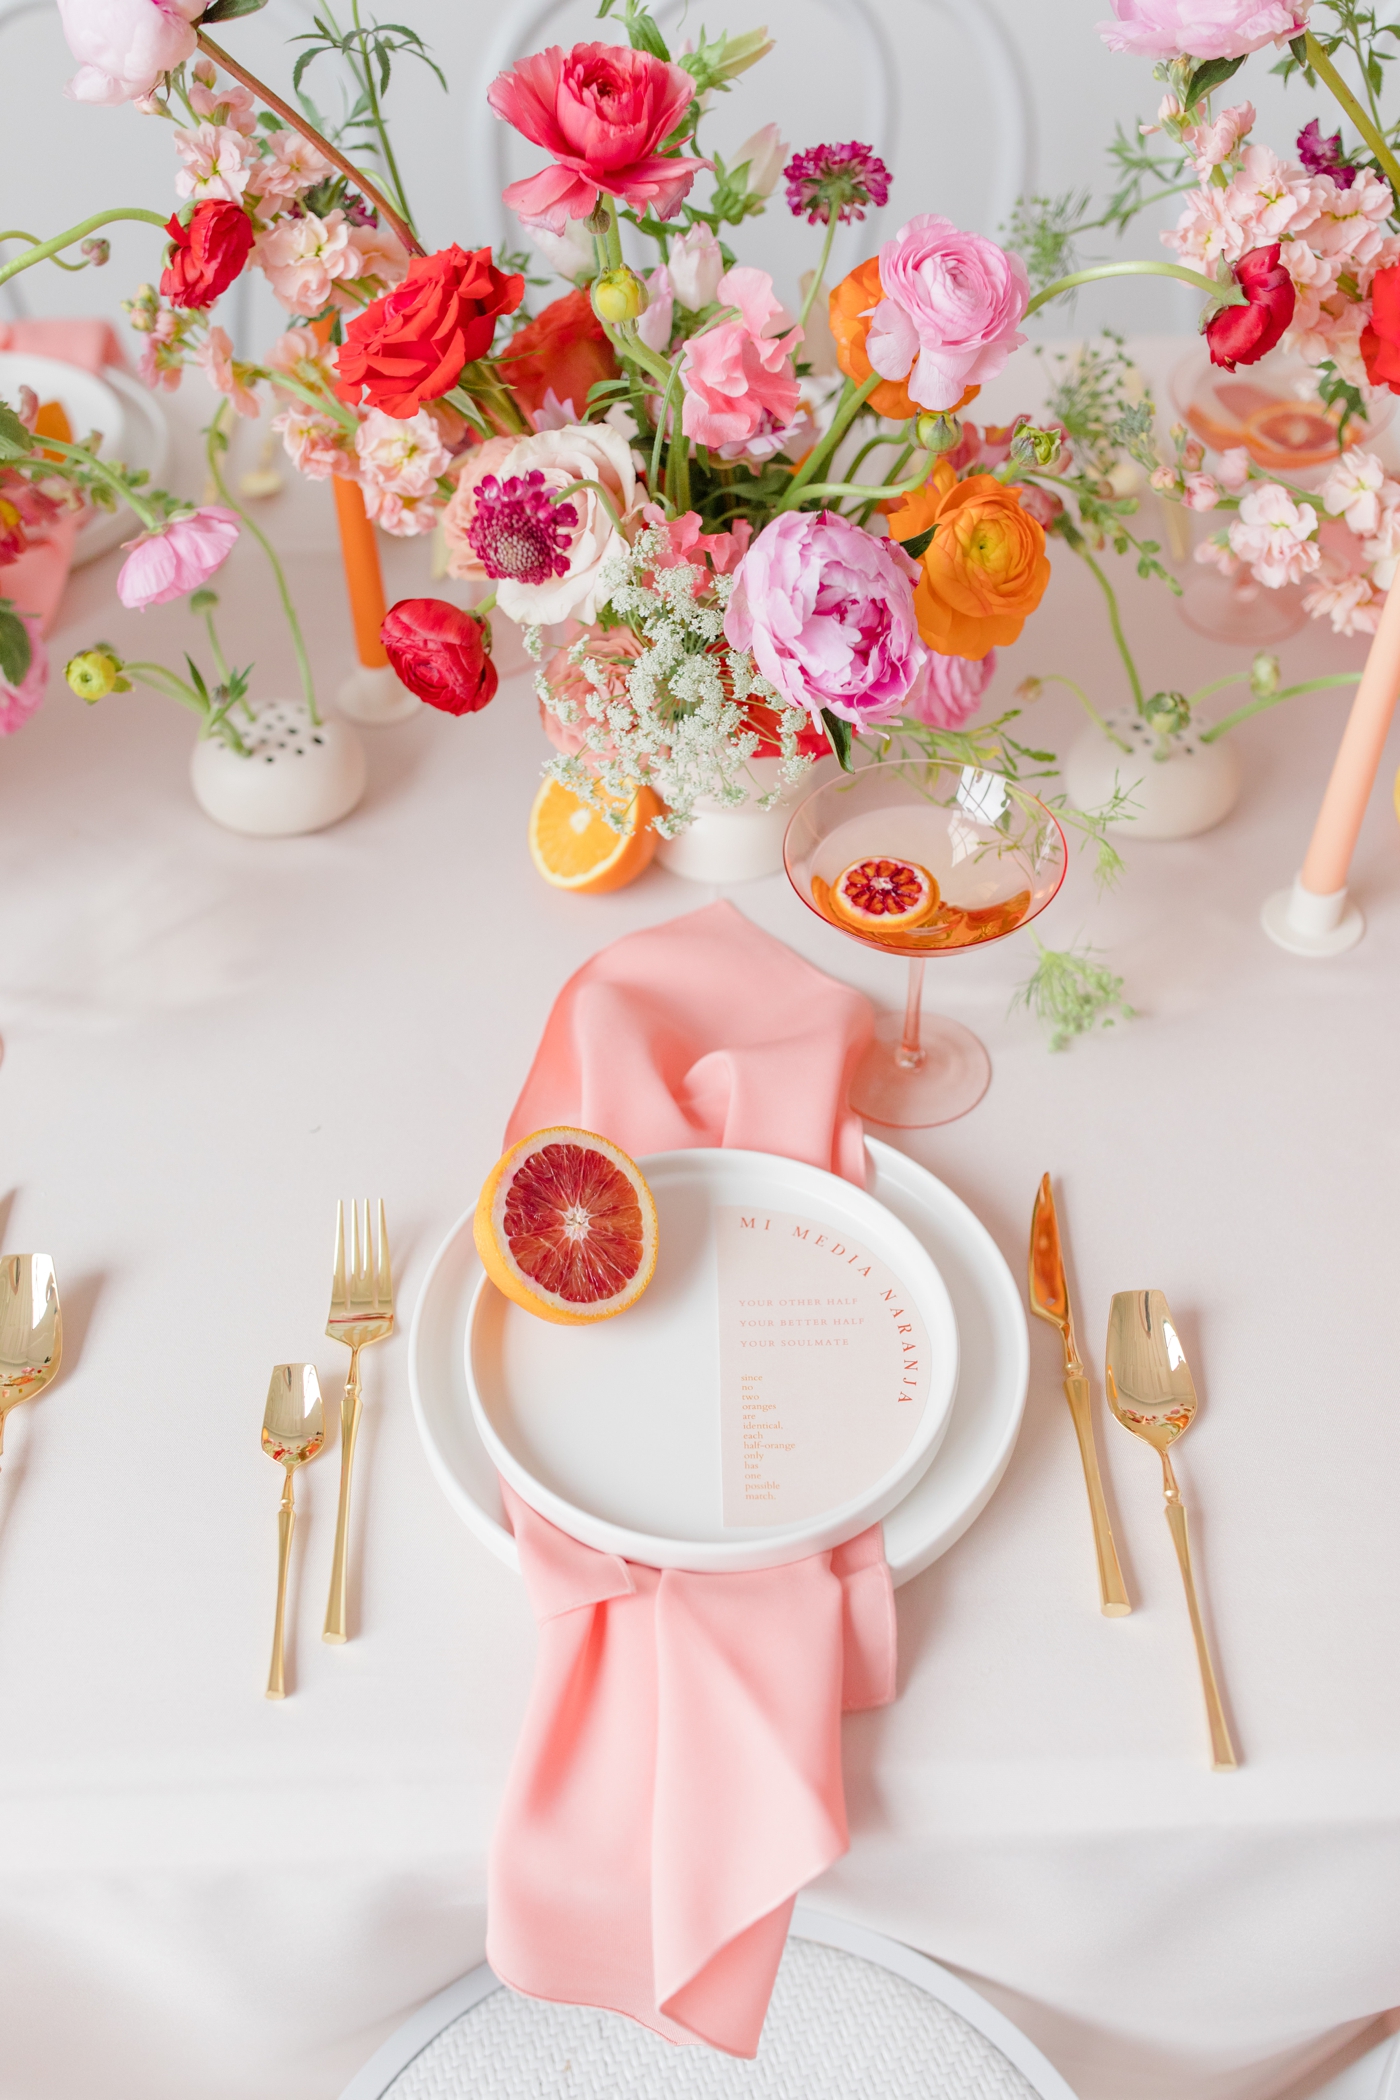 Colorful wedding tablescape with pink linens and citrus fruit accents